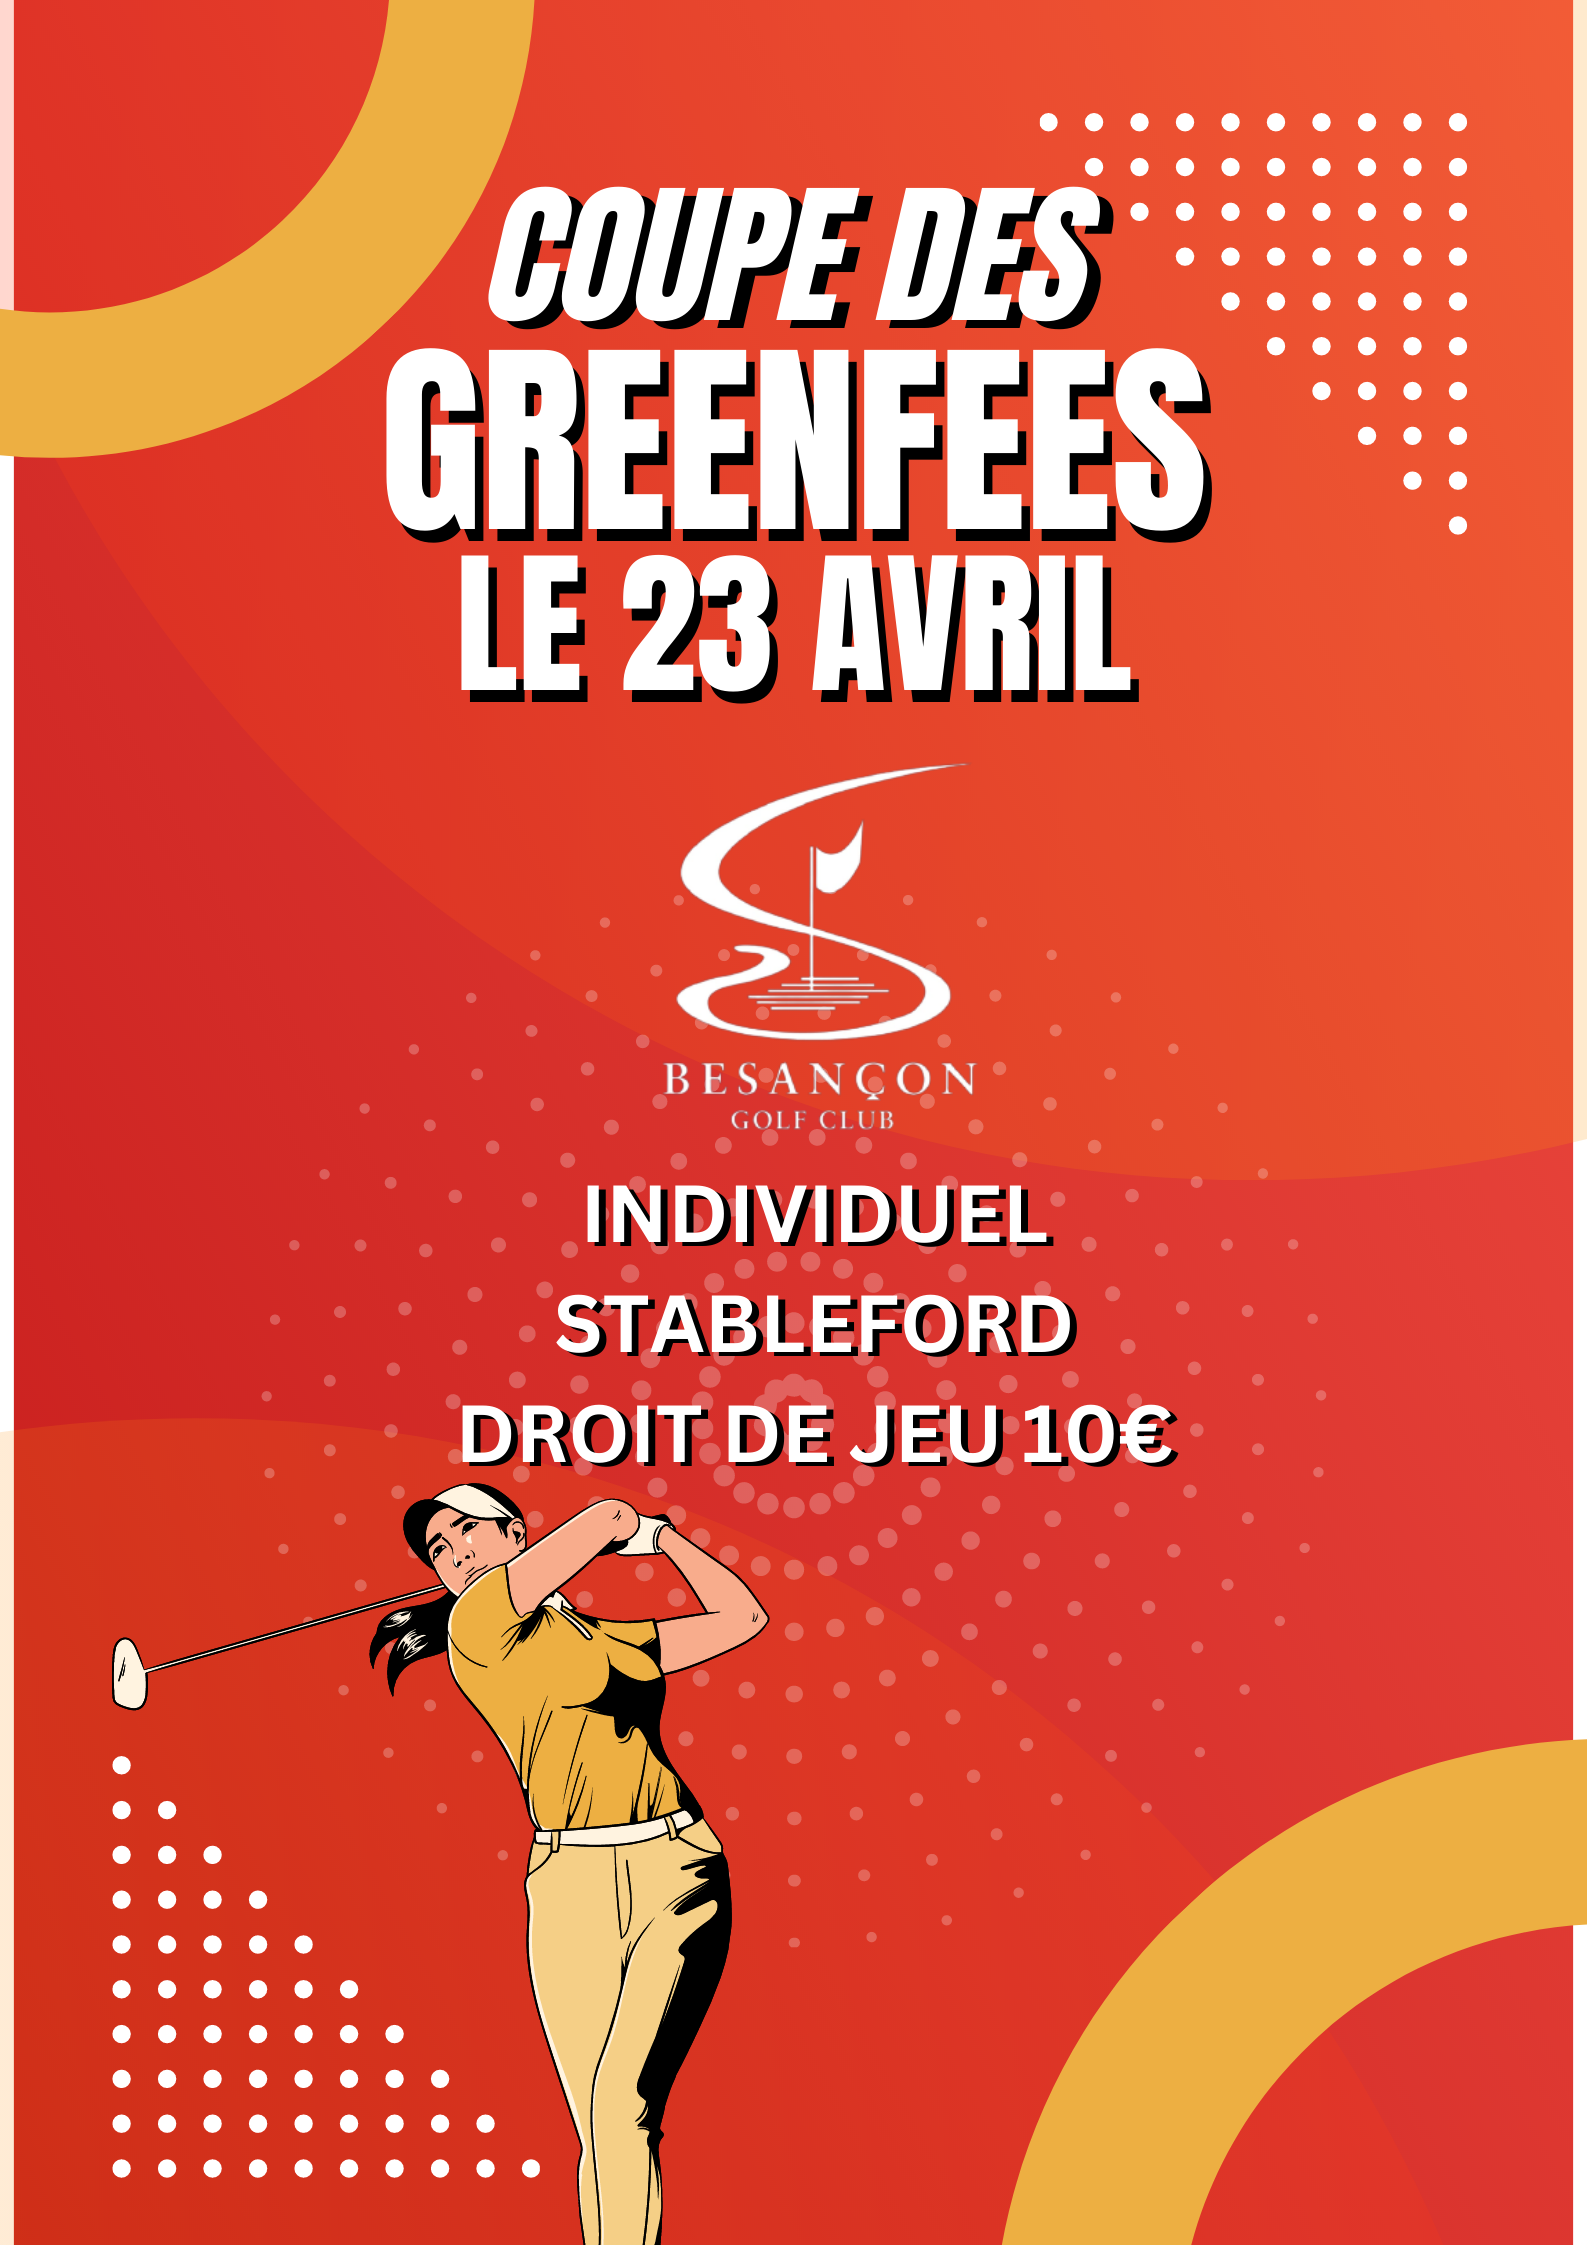 Coupe des greenfees